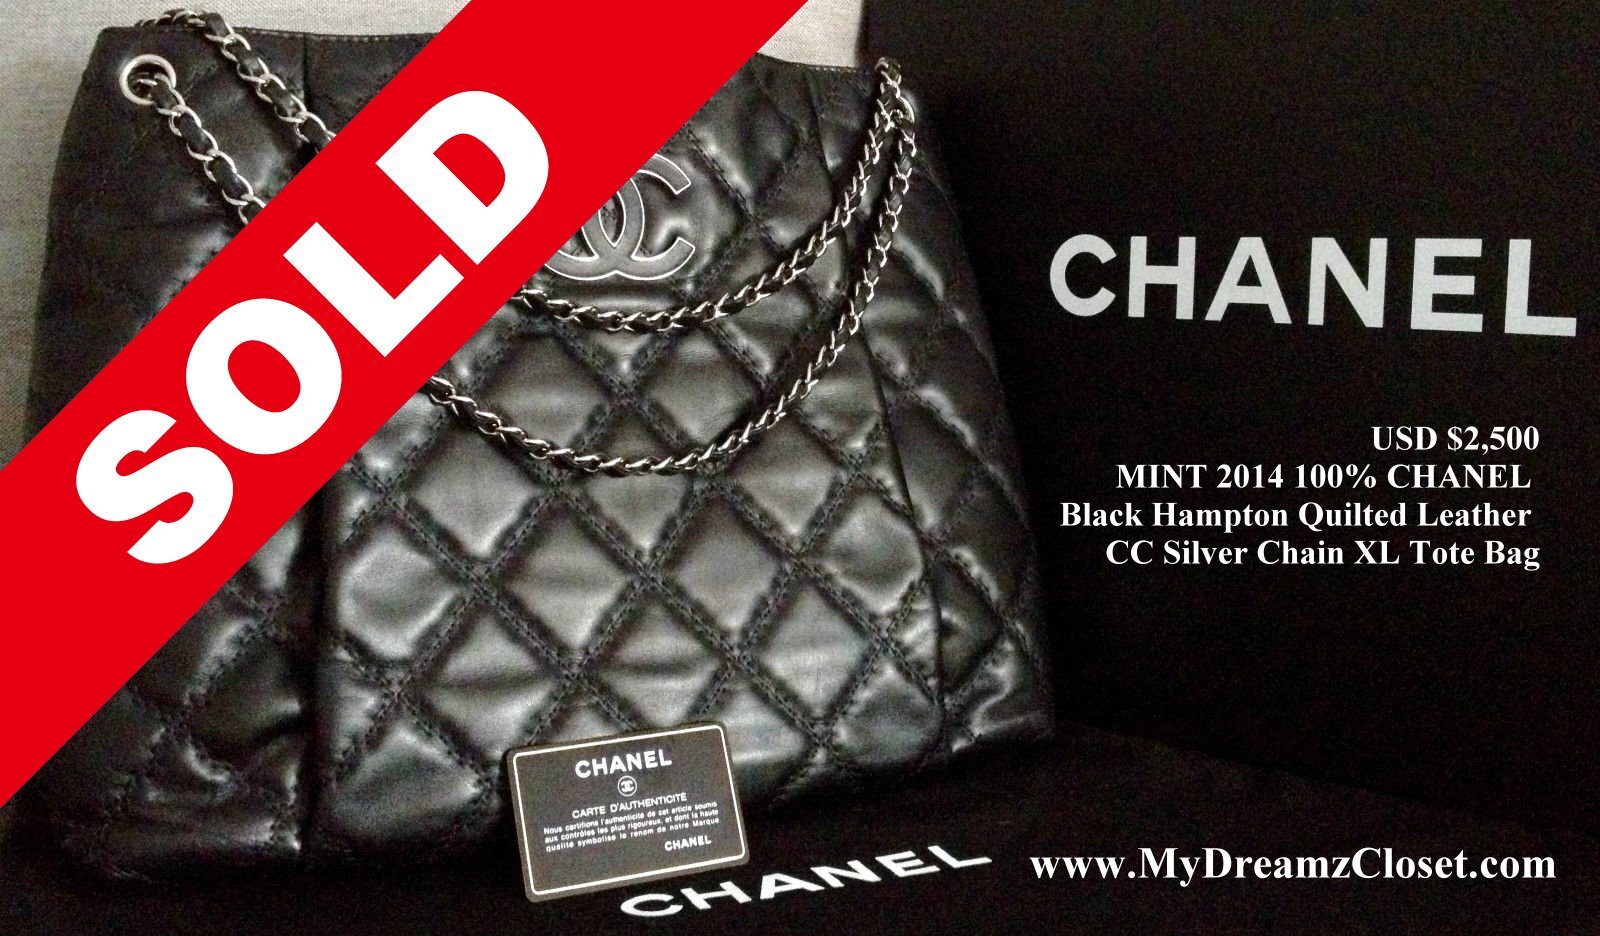 SOLD Lambskin 1 - MINT 2014 100% CHANEL Black Hampton Quilted